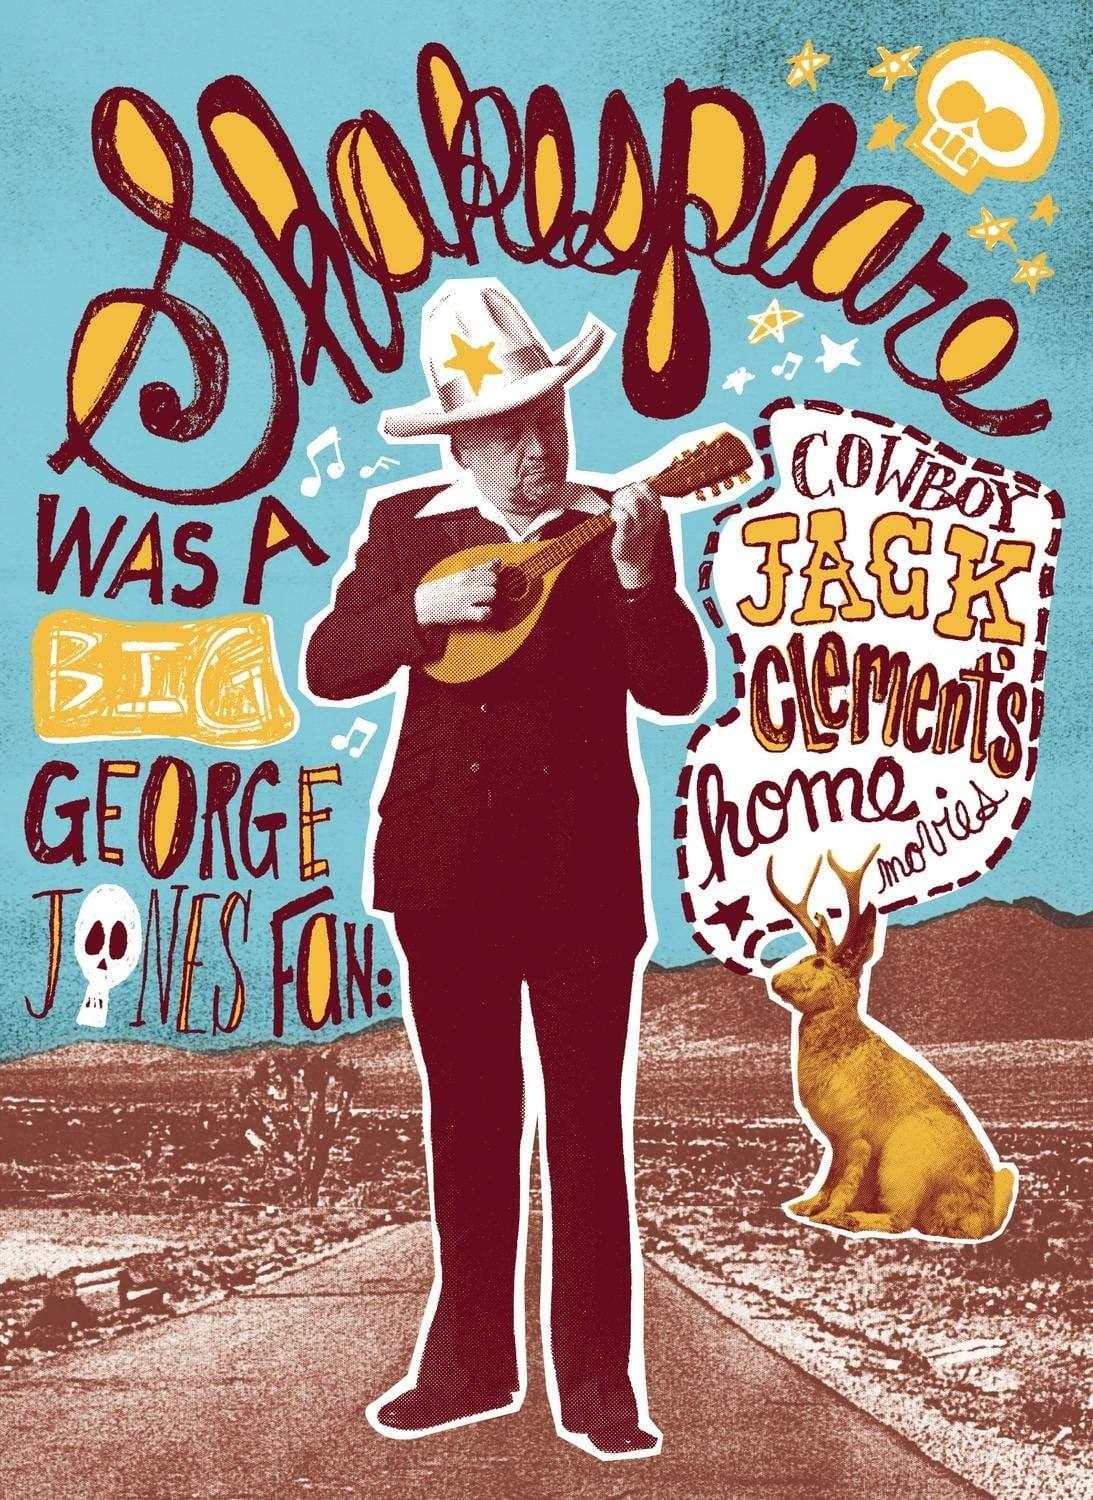 Shakespeare Was a Big George Jones Fan: 'Cowboy' Jack Clement's Home Movies poster